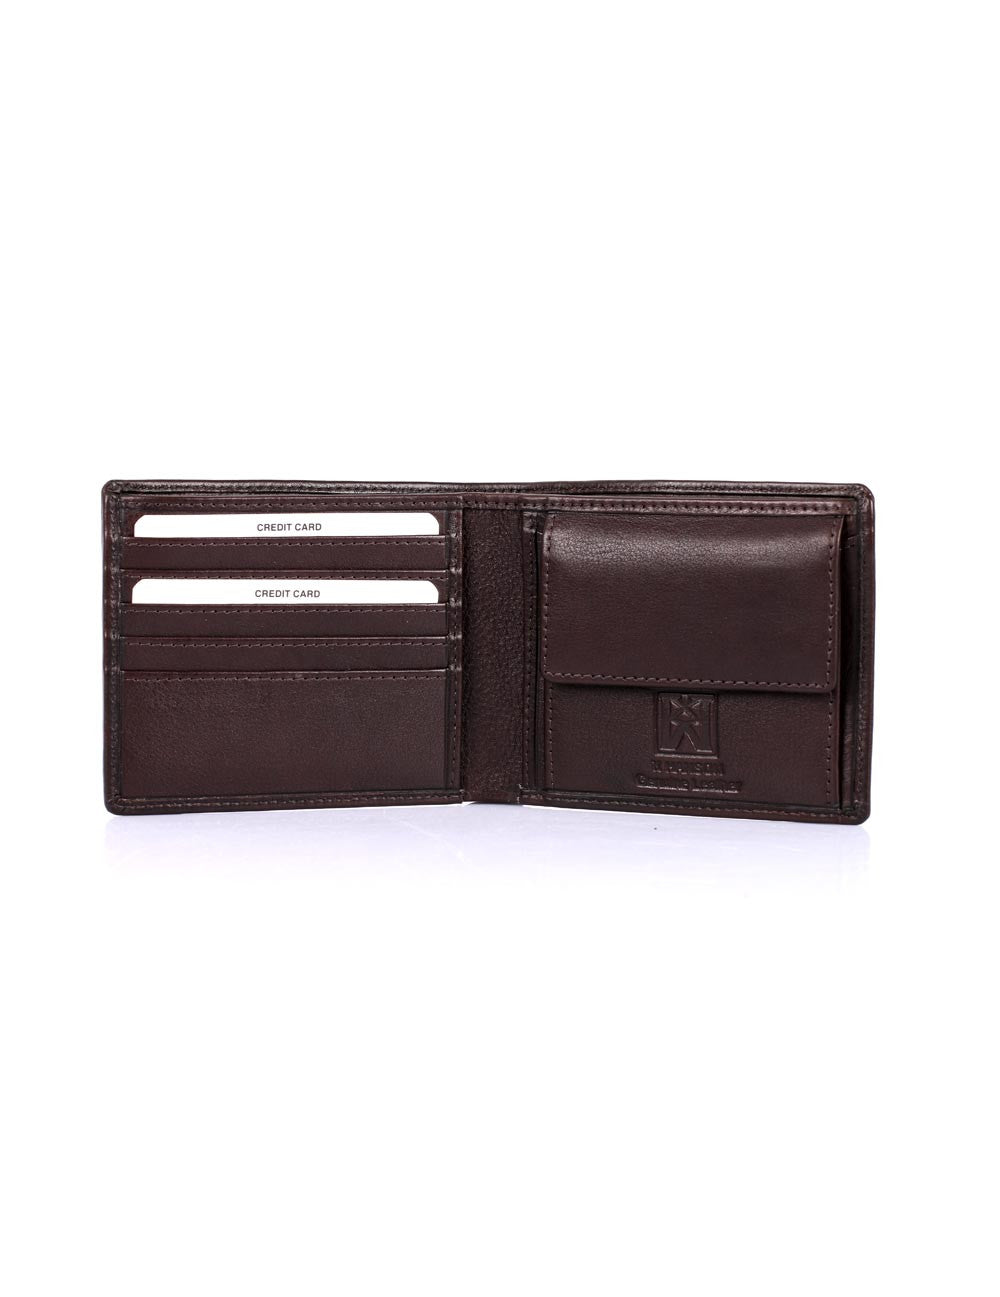 Two Pocket, Money Clip Wallet .Calf — Pinnell Custom Leather